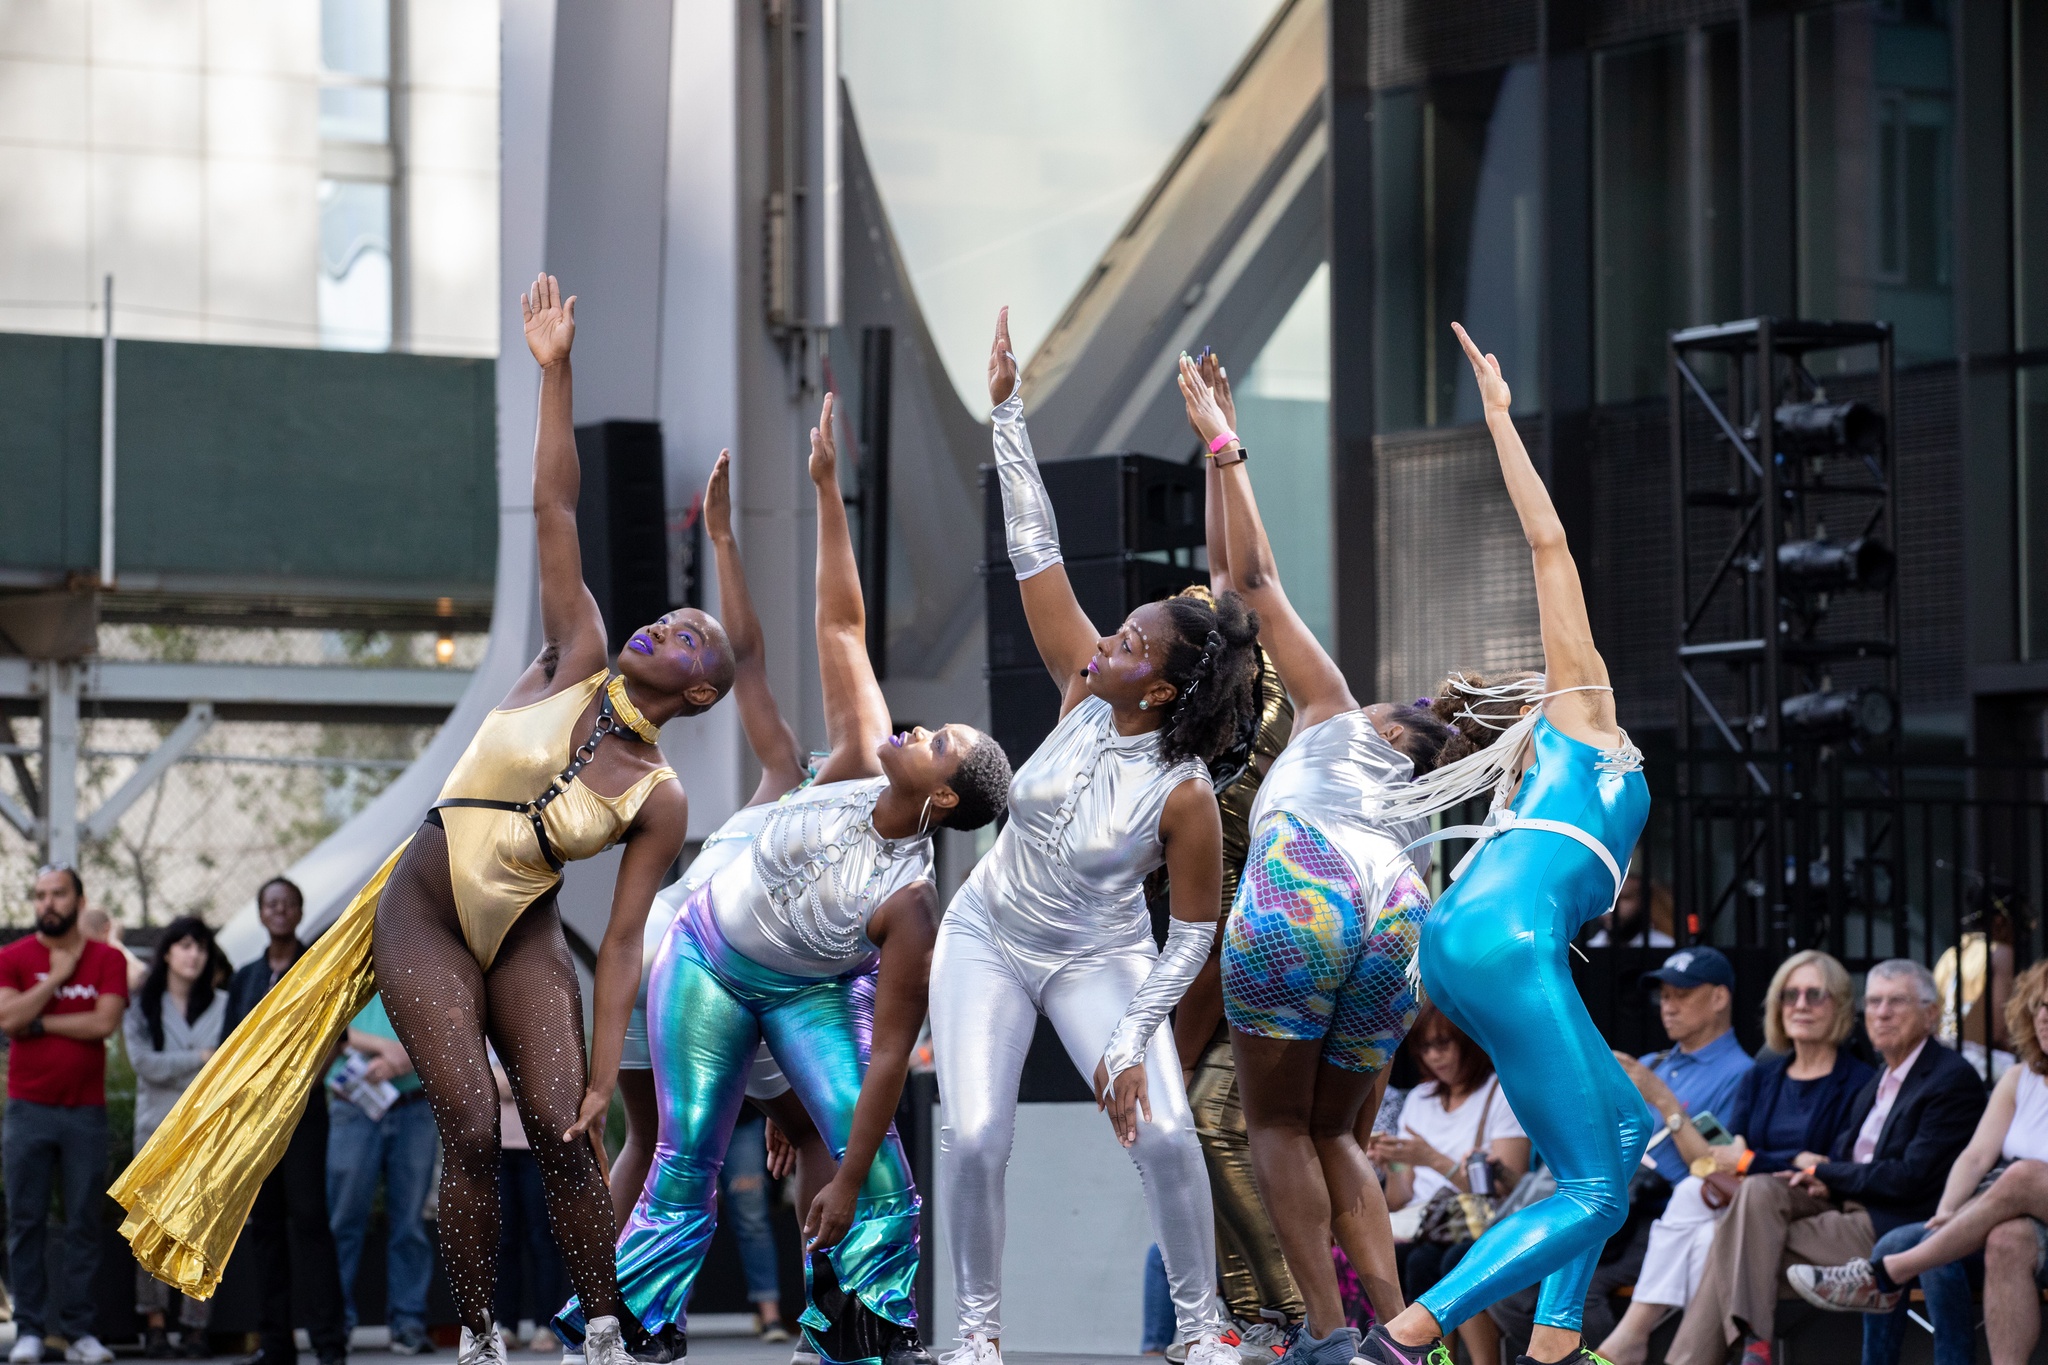 Dancers in motion on an outdoor stage.